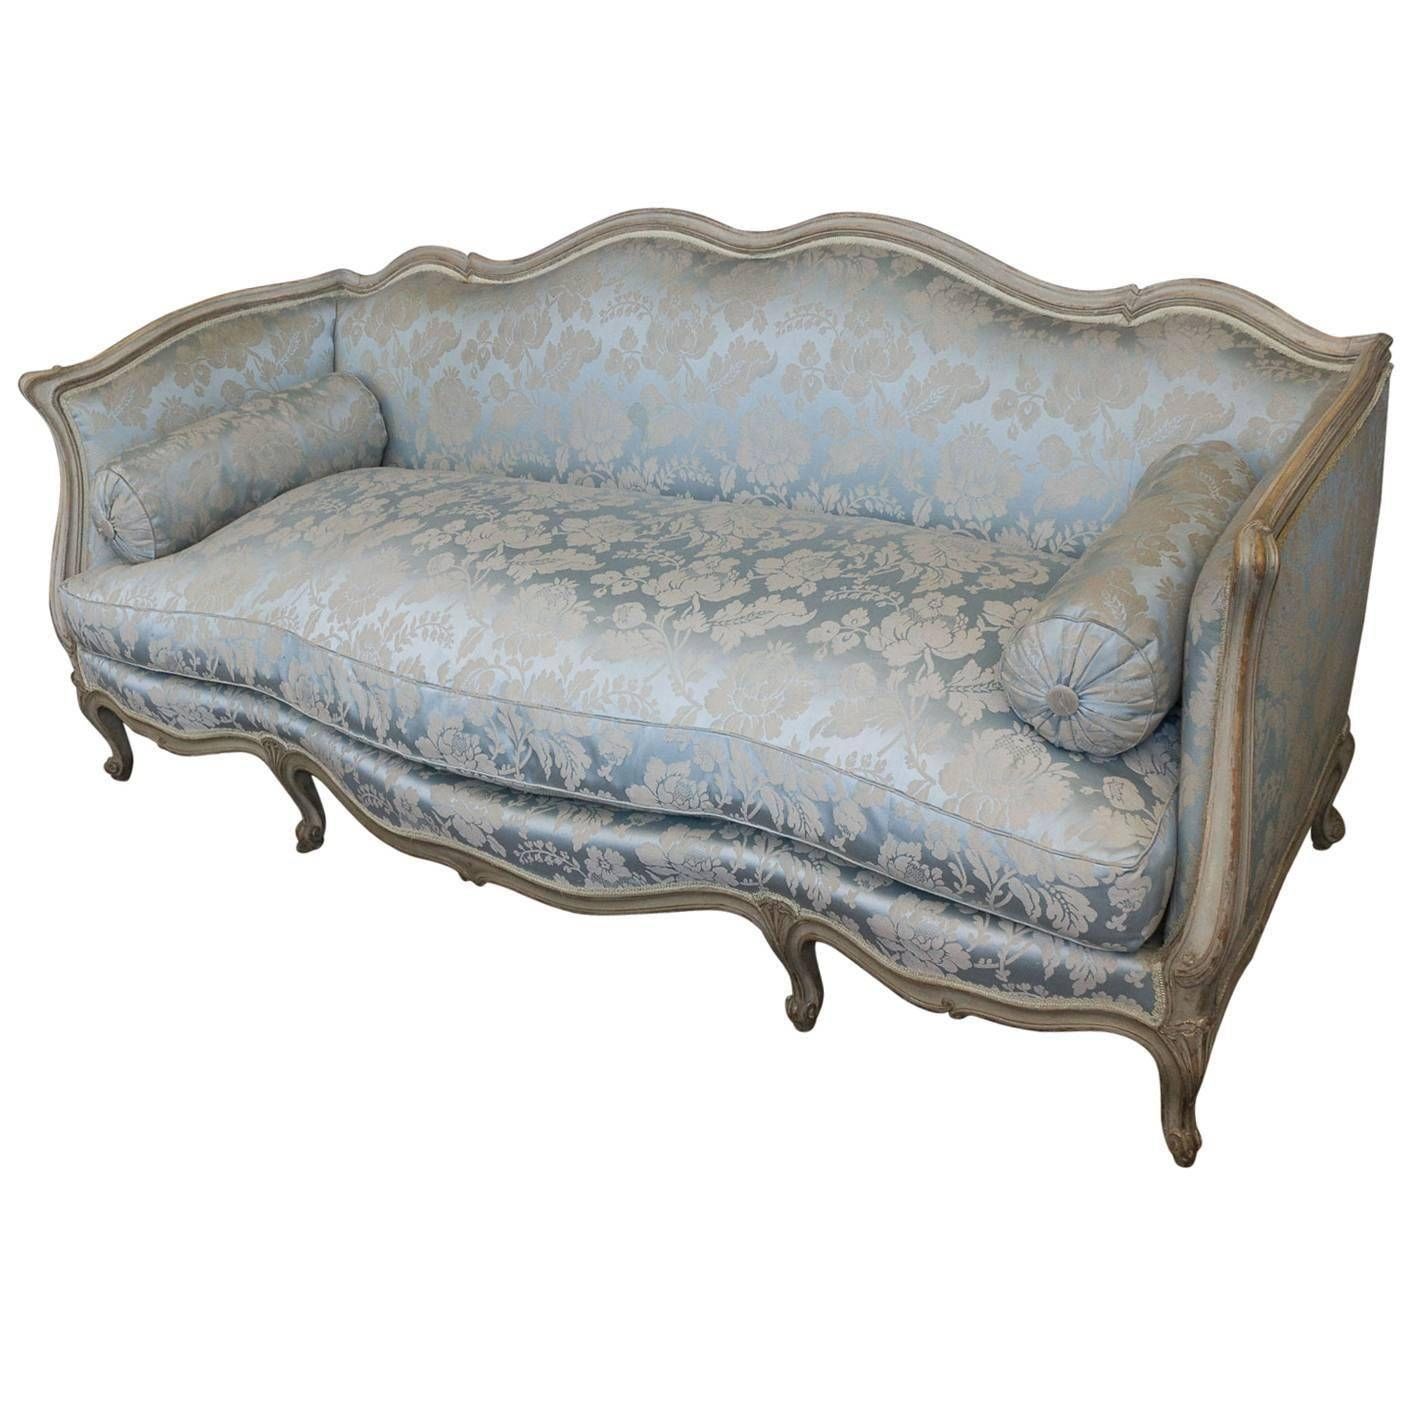 French Louis Xv Style Sofa For Sale At 1stdibs Regarding French Style Sofas (View 8 of 25)